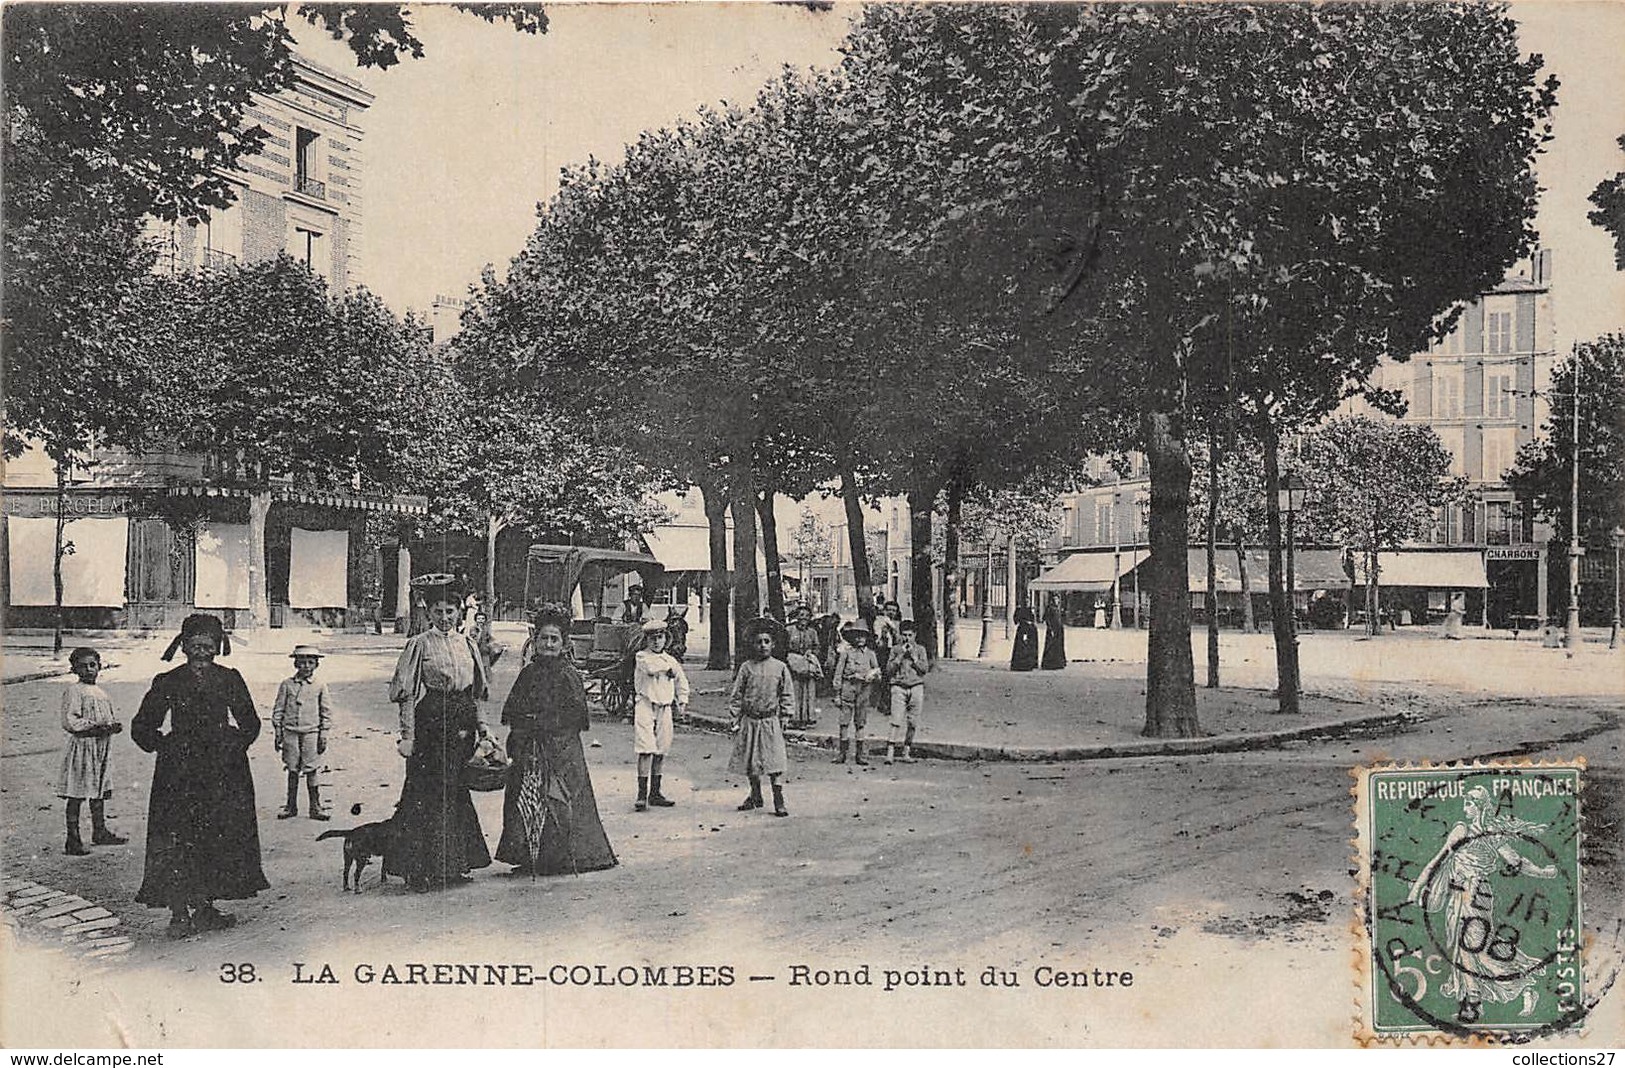 92-COLOMBES- ROND POIND DU CNETRE - Colombes